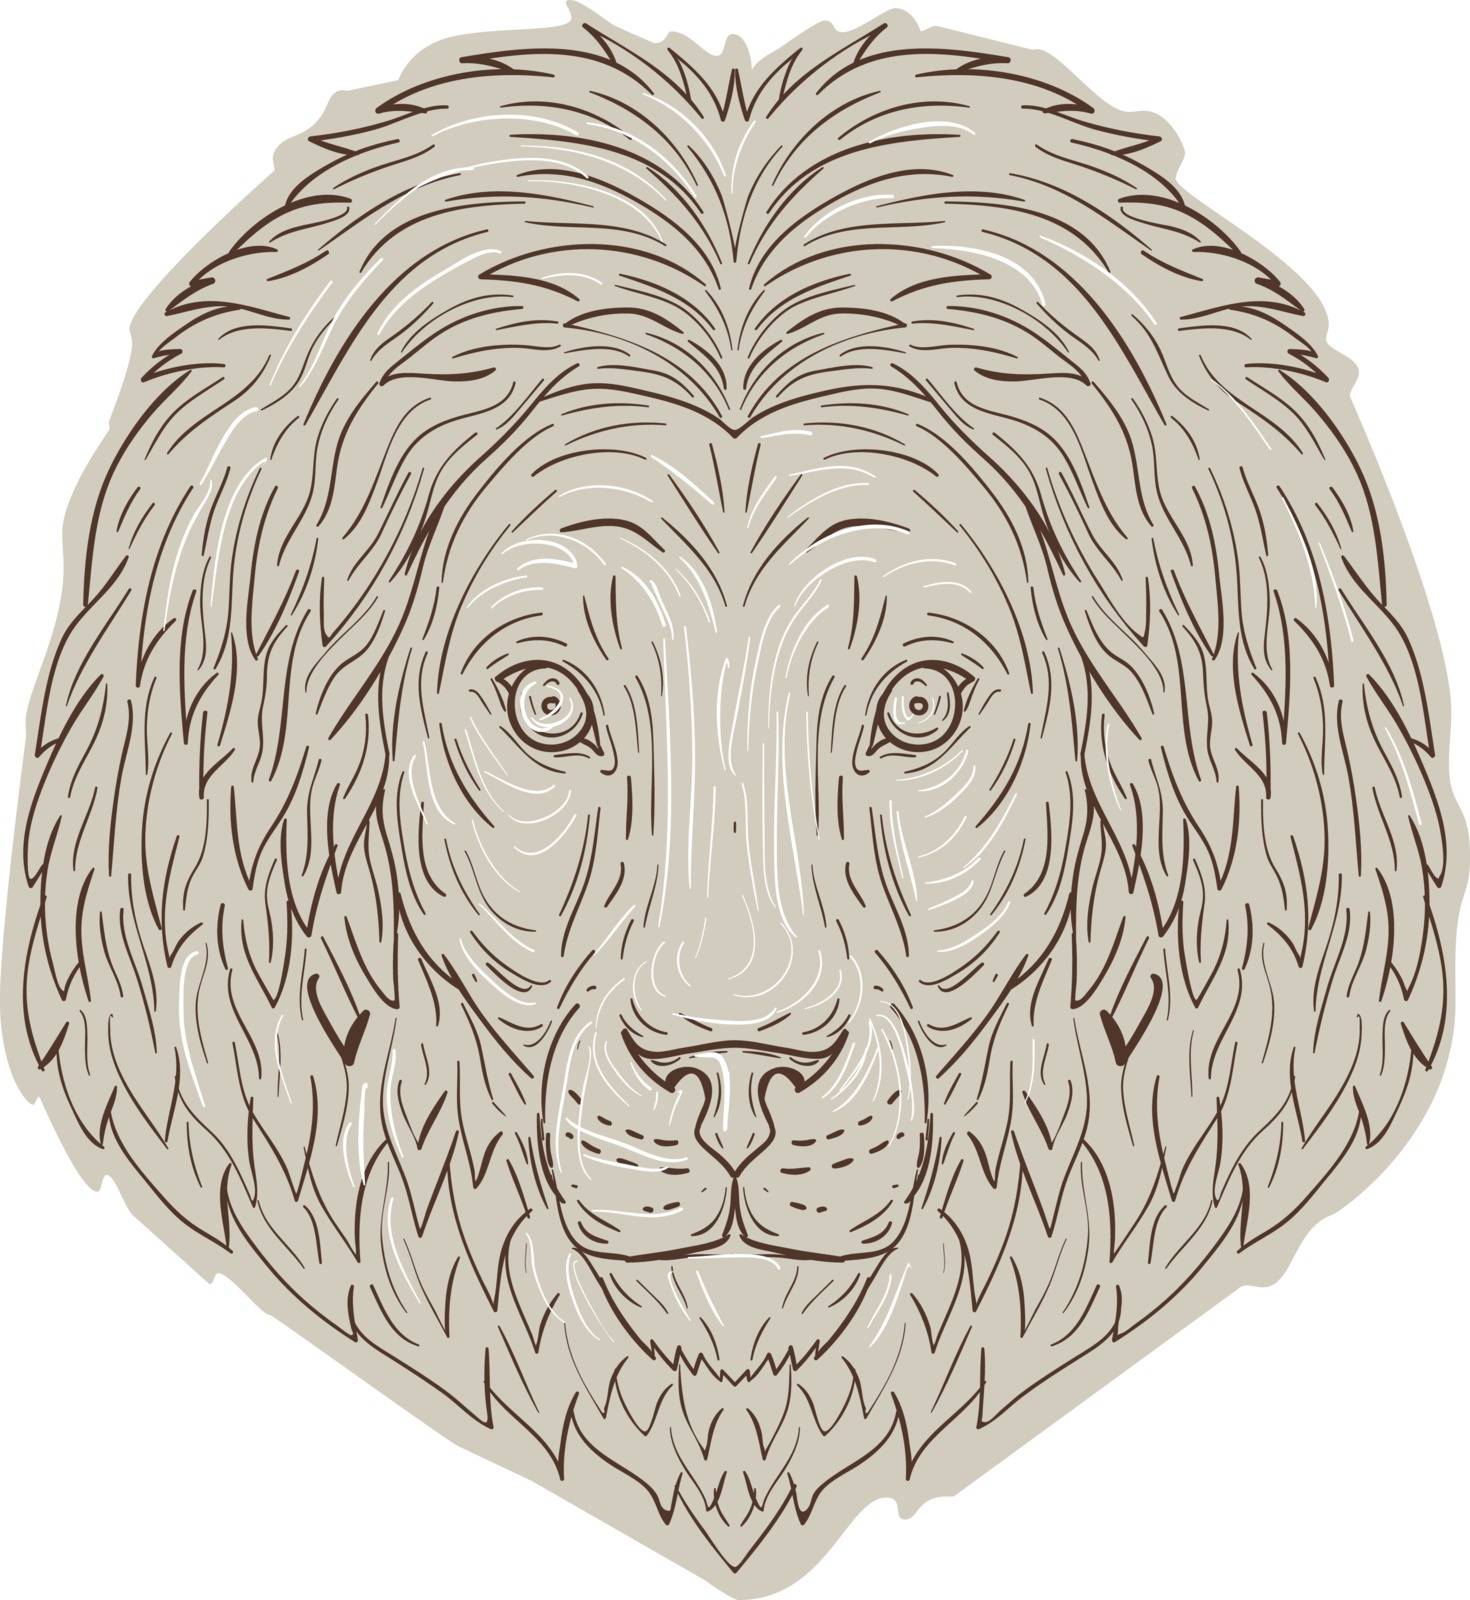 Drawing sketch style illustration of a lion big cat head with flowing mane viewed from front set on isolated white background. 